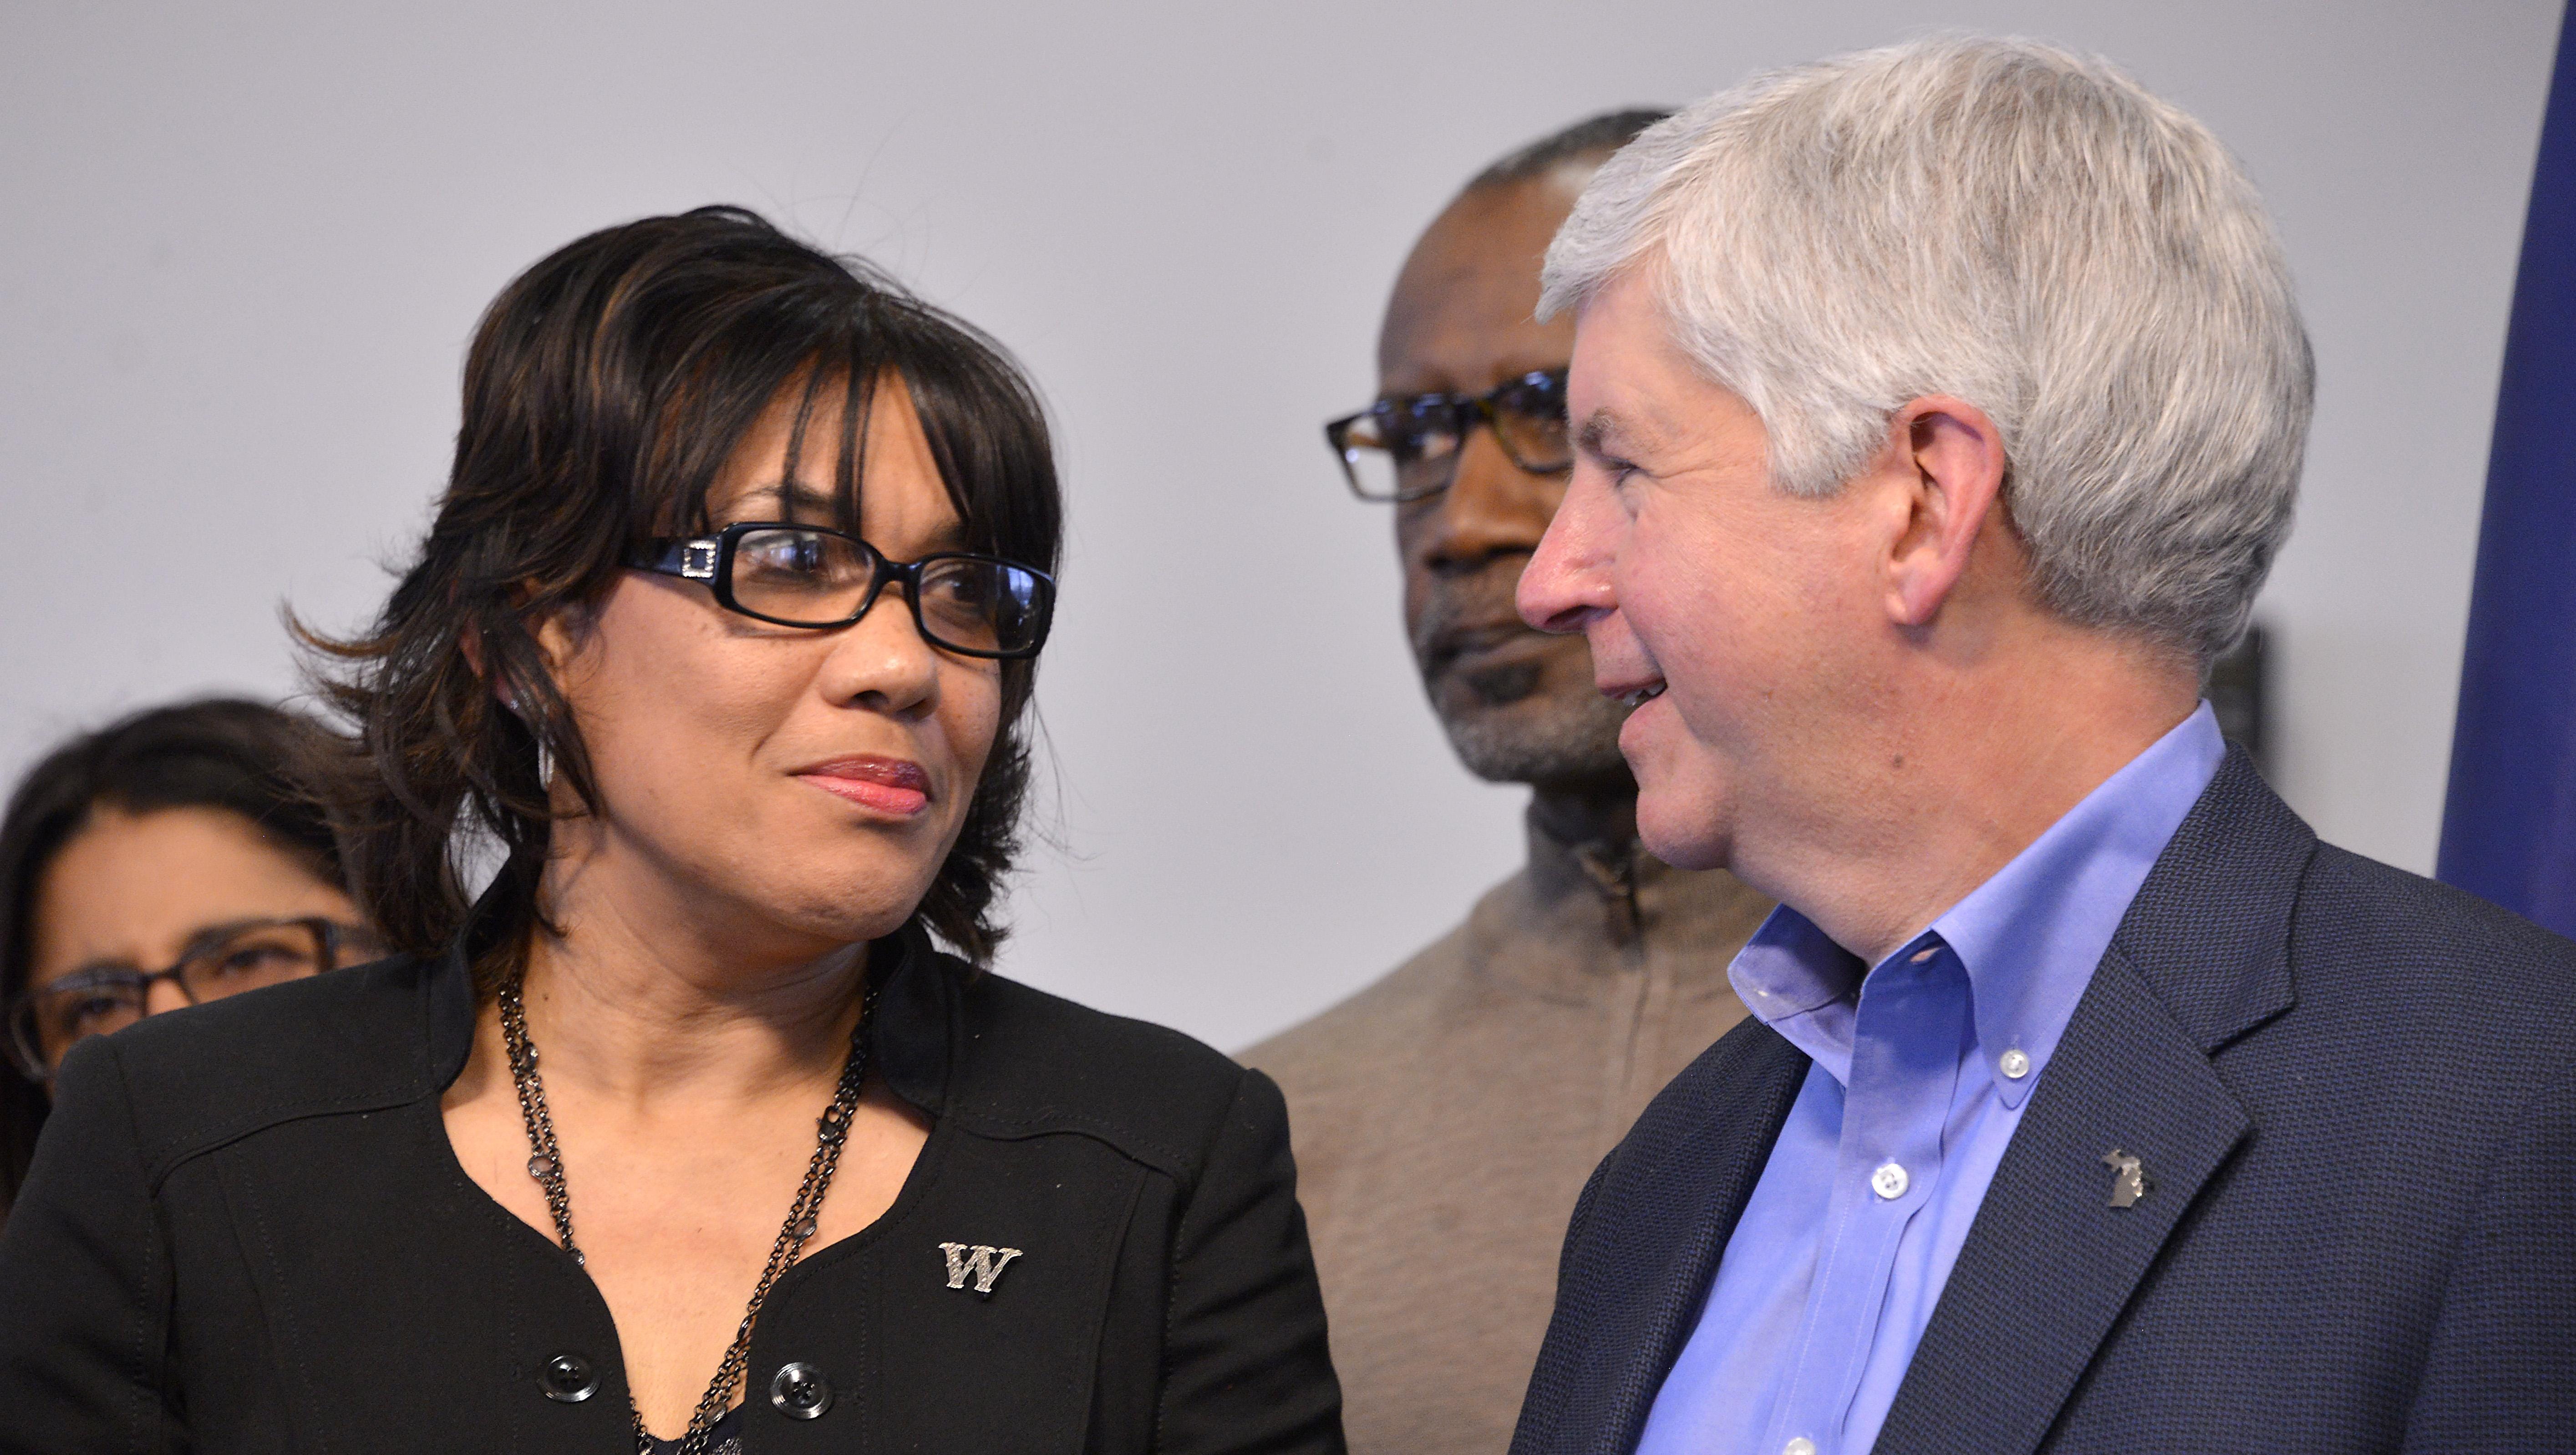 Gov Rick Snyder and Flint Mayor Karen Weaver speak at a news conference Monday, Jan 11, 2016 at Flint City Hall about the city's water crisis. The U.S. Environmental Protection Agency has sided with the state in a battle over whether the city of Flint should be forced to sign a consent order requiring fixes to the city’s water system.